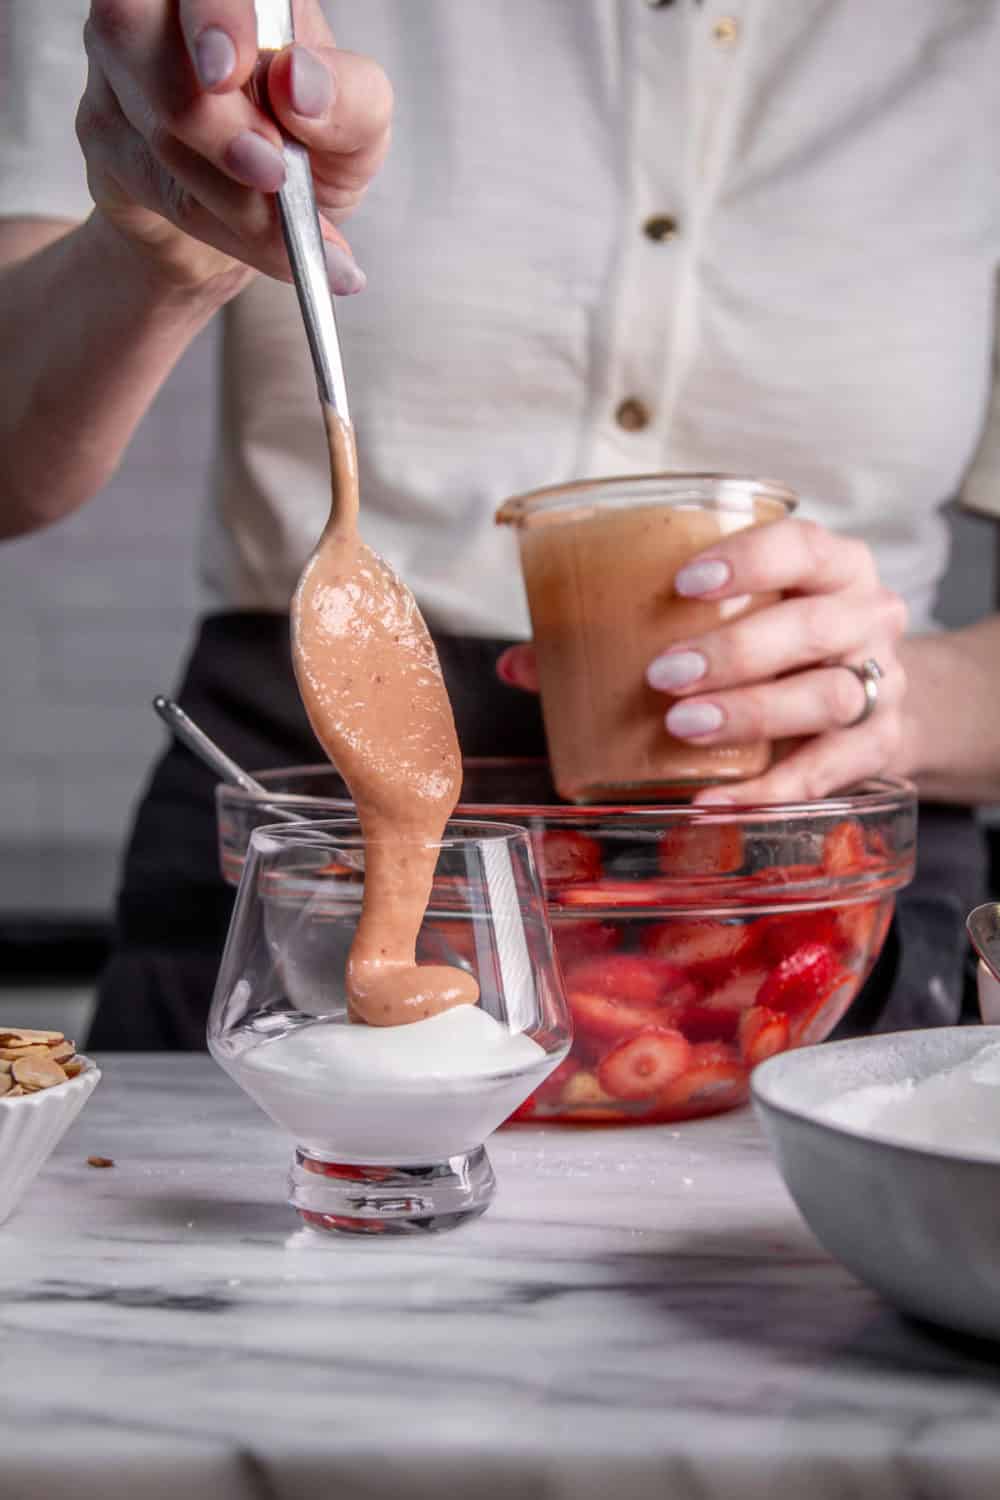 Adding strawberry curd to a glass with whipped cream.